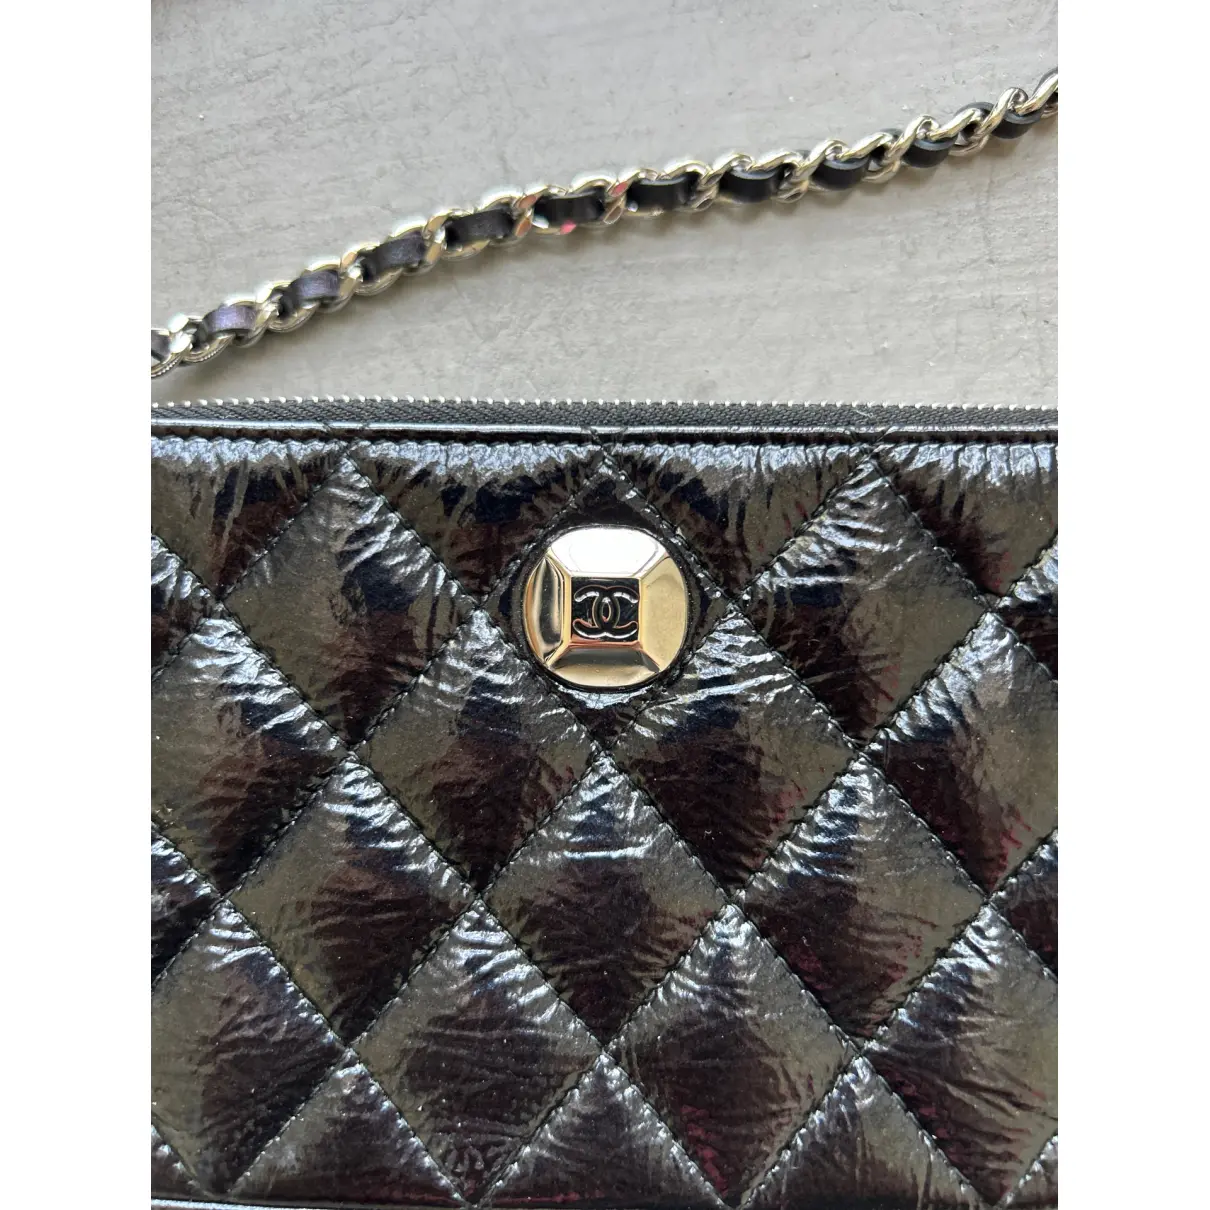 Buy Chanel Wallet on Chain leather clutch bag online